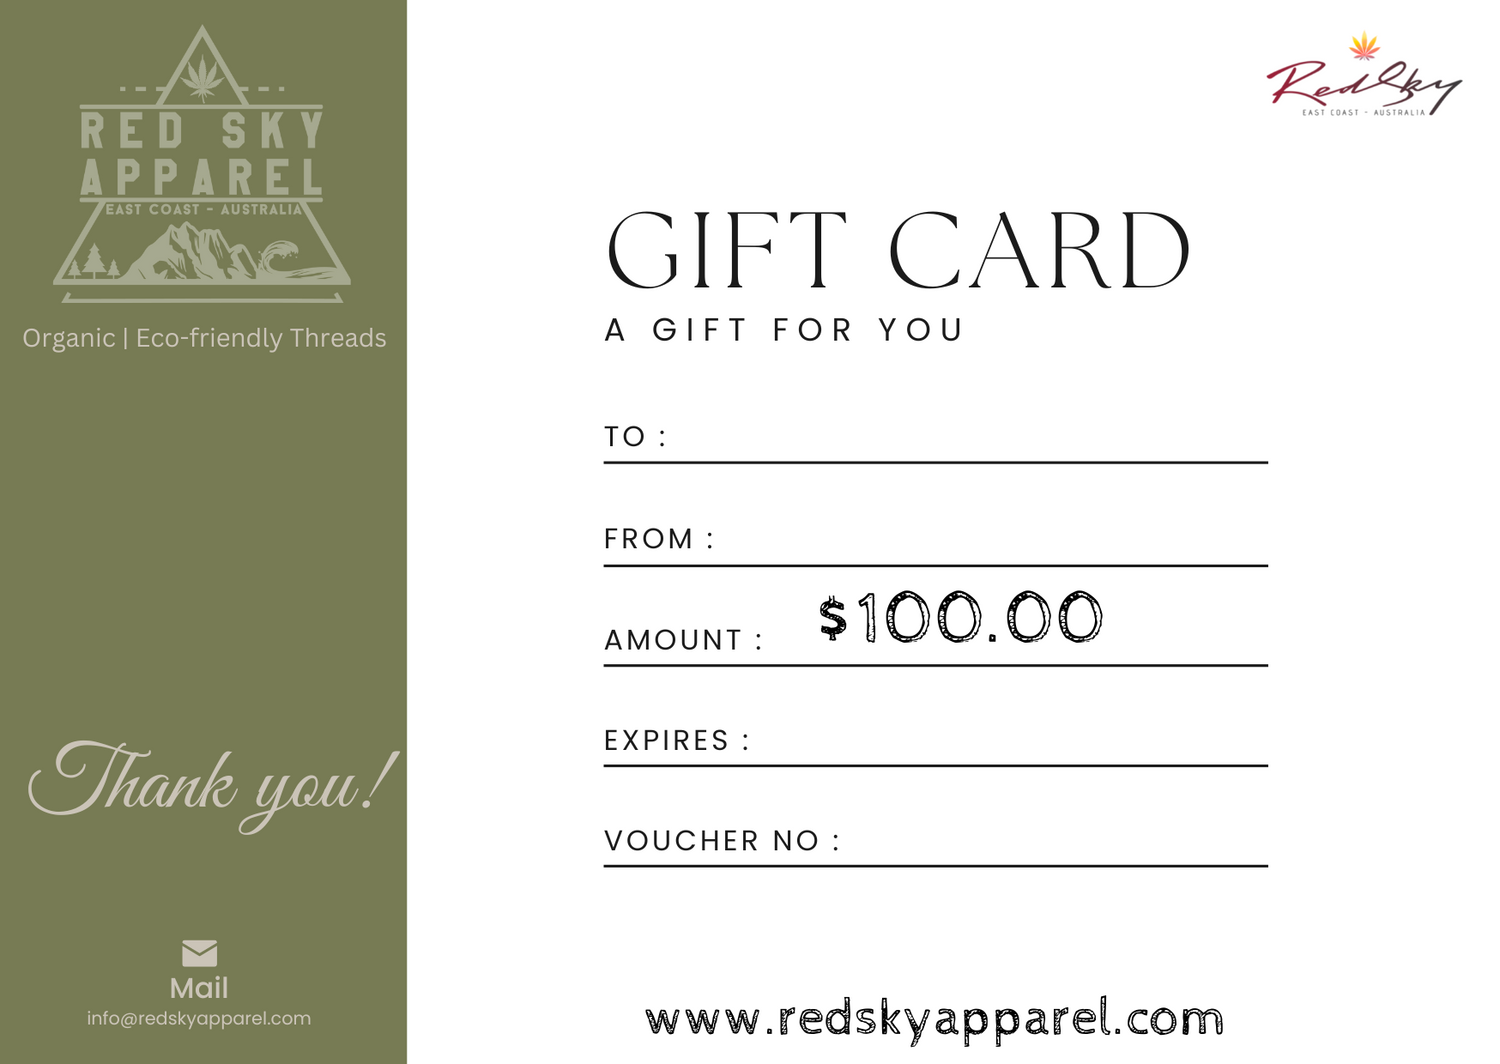 RED SKY Gift Card